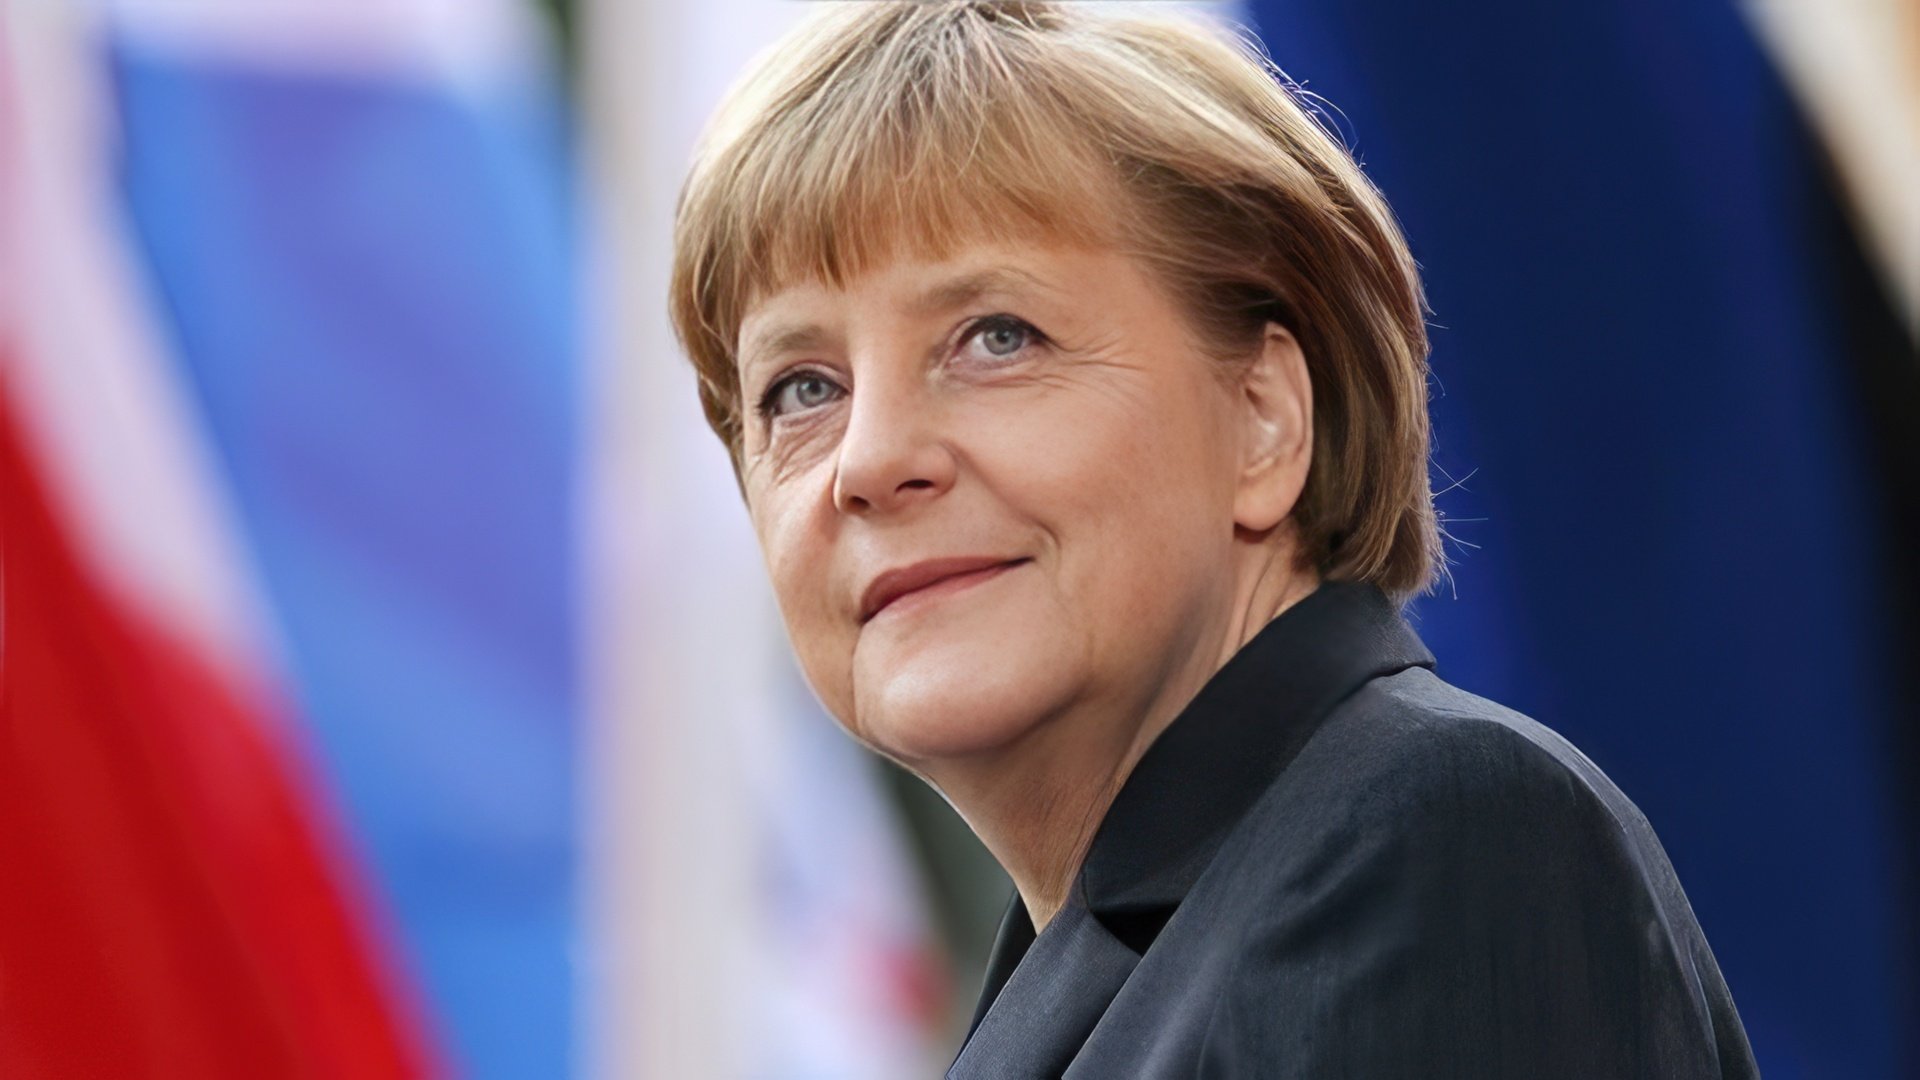 Angela Merkel has repeatedly demonstrated her remarkable political talent